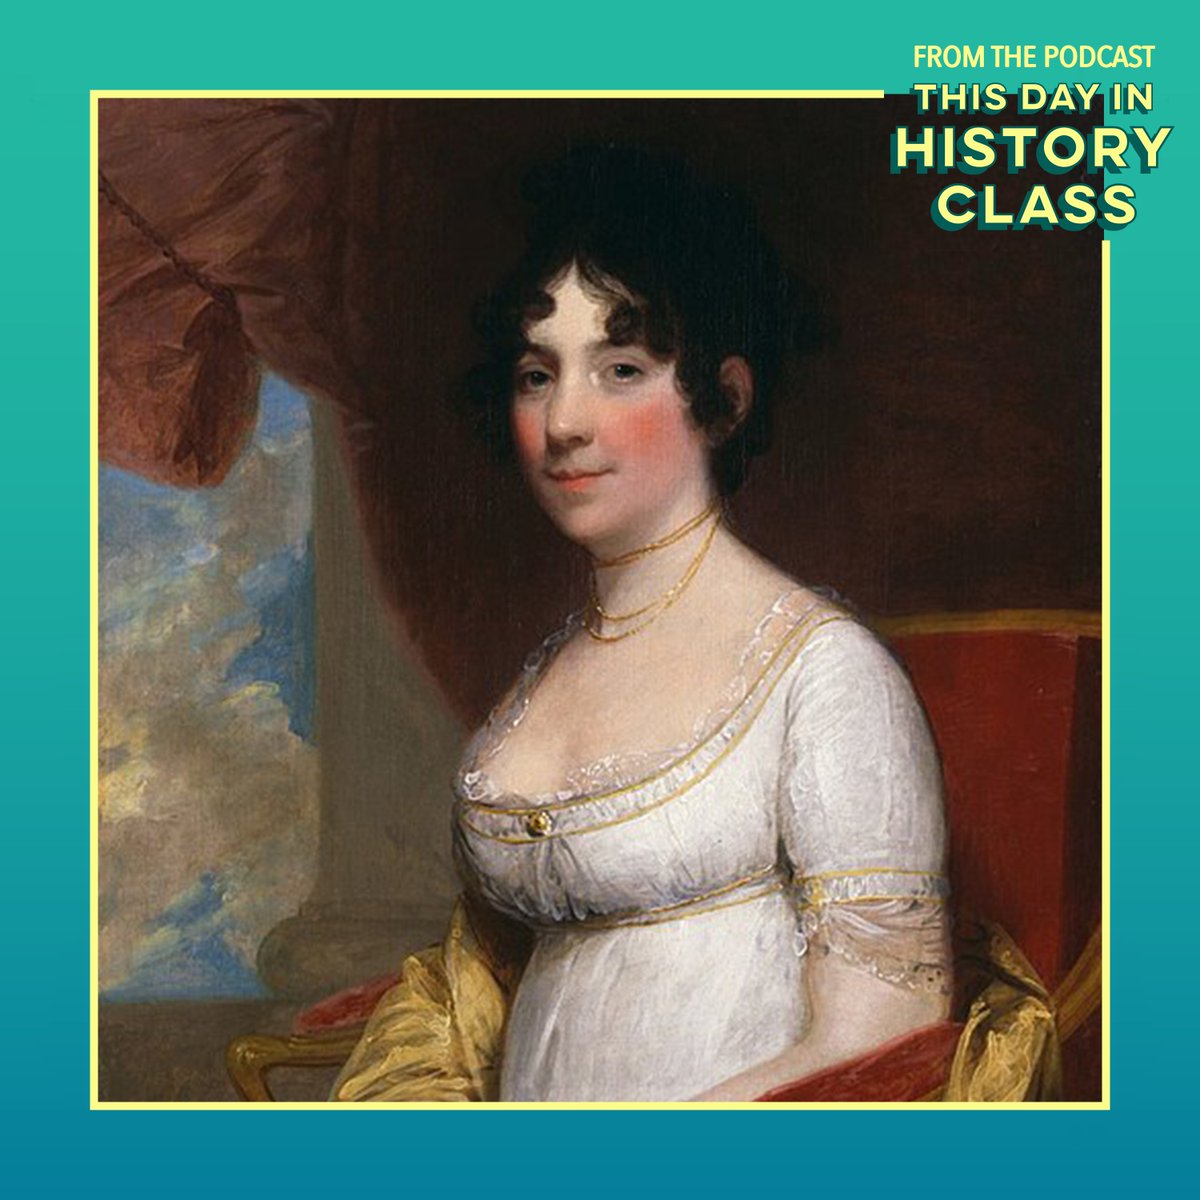 On this day in 1809, Mary Kies became the 1st woman in the U.S. to receive a patent in her own name.

#MaryKies #Patent #Inventor #Hat #NapoleonicWars #Fashion #StrawHats #DolleyMadison #TDIHC #ThisDayInHistory #TodayInHistory #OnThisDay #May5

Listen now:
omny.fm/shows/this-day…